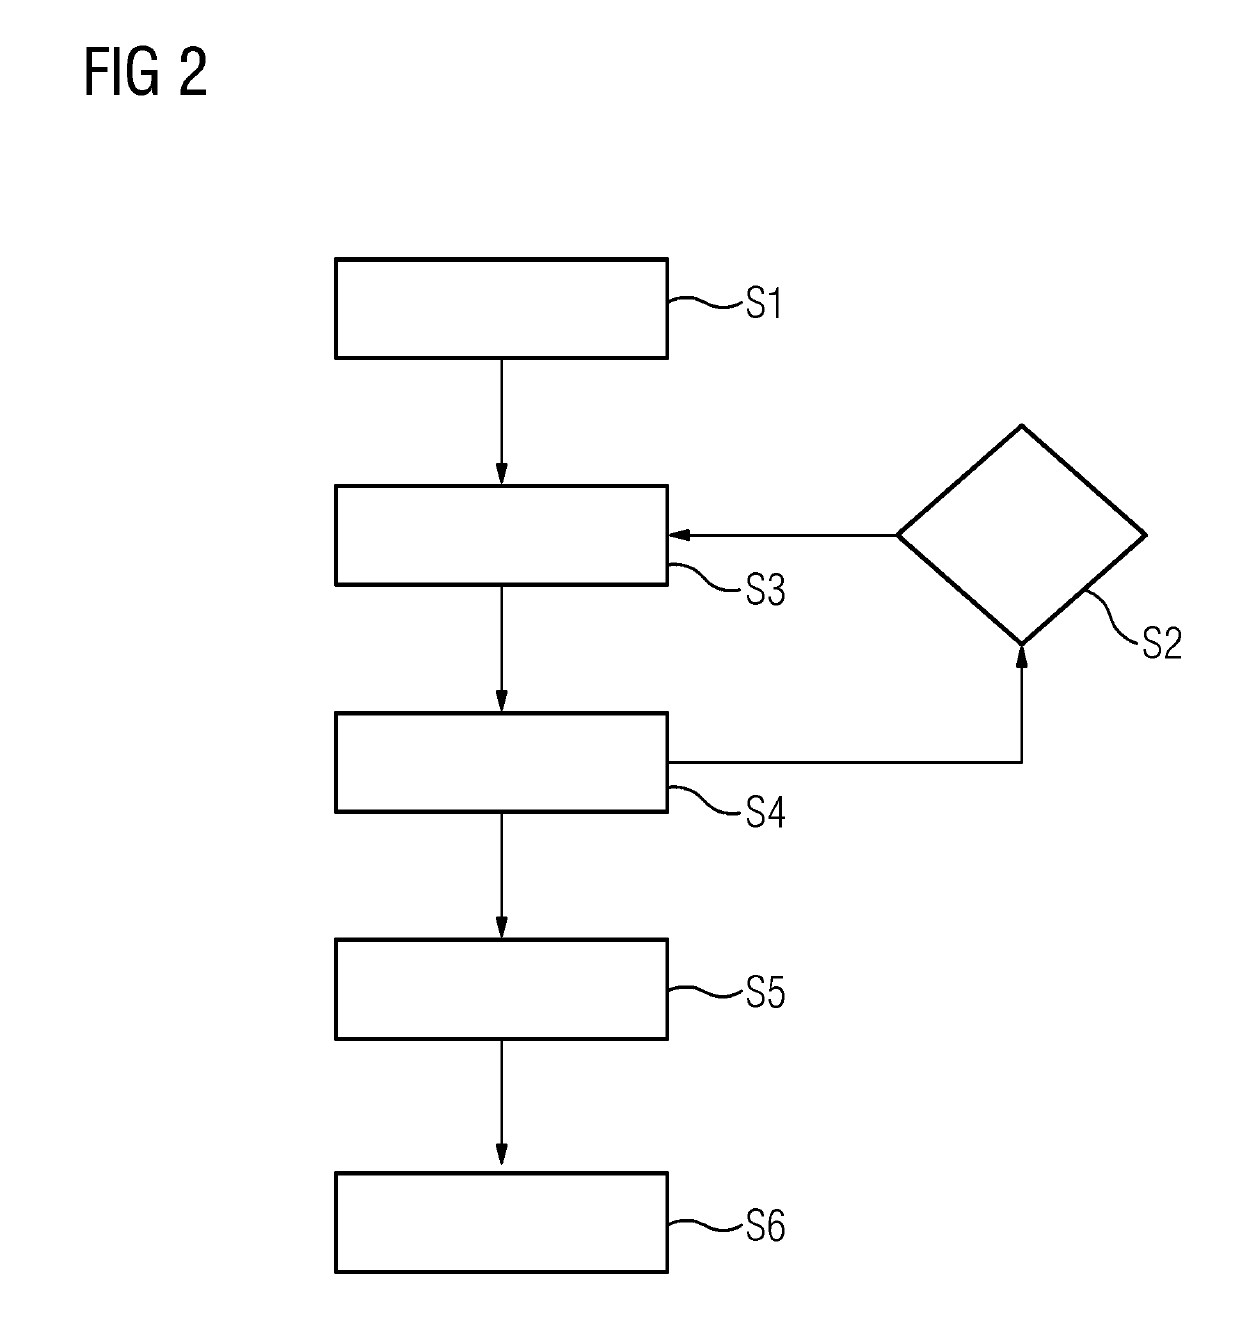 Method and apparatus for identifying faults for a technical system